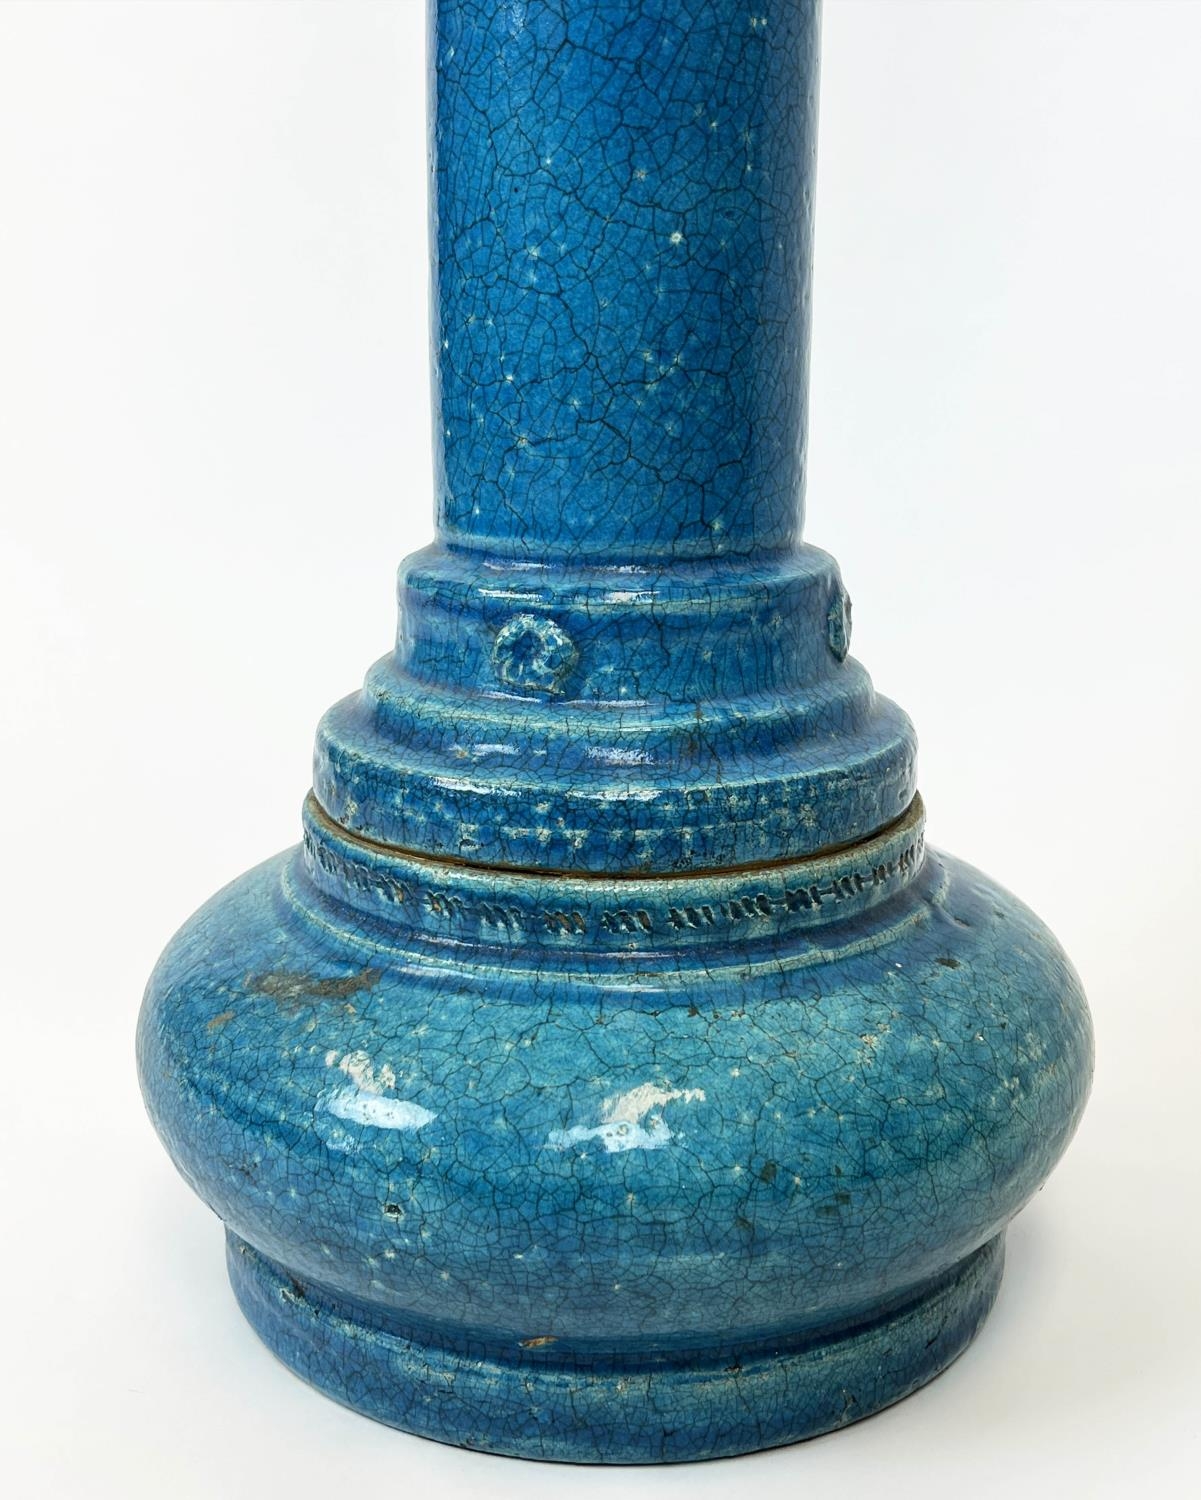 JARDINIERE ON STAND, Victorian style turquoise glazed ceramic, 102cm H. - Image 4 of 6